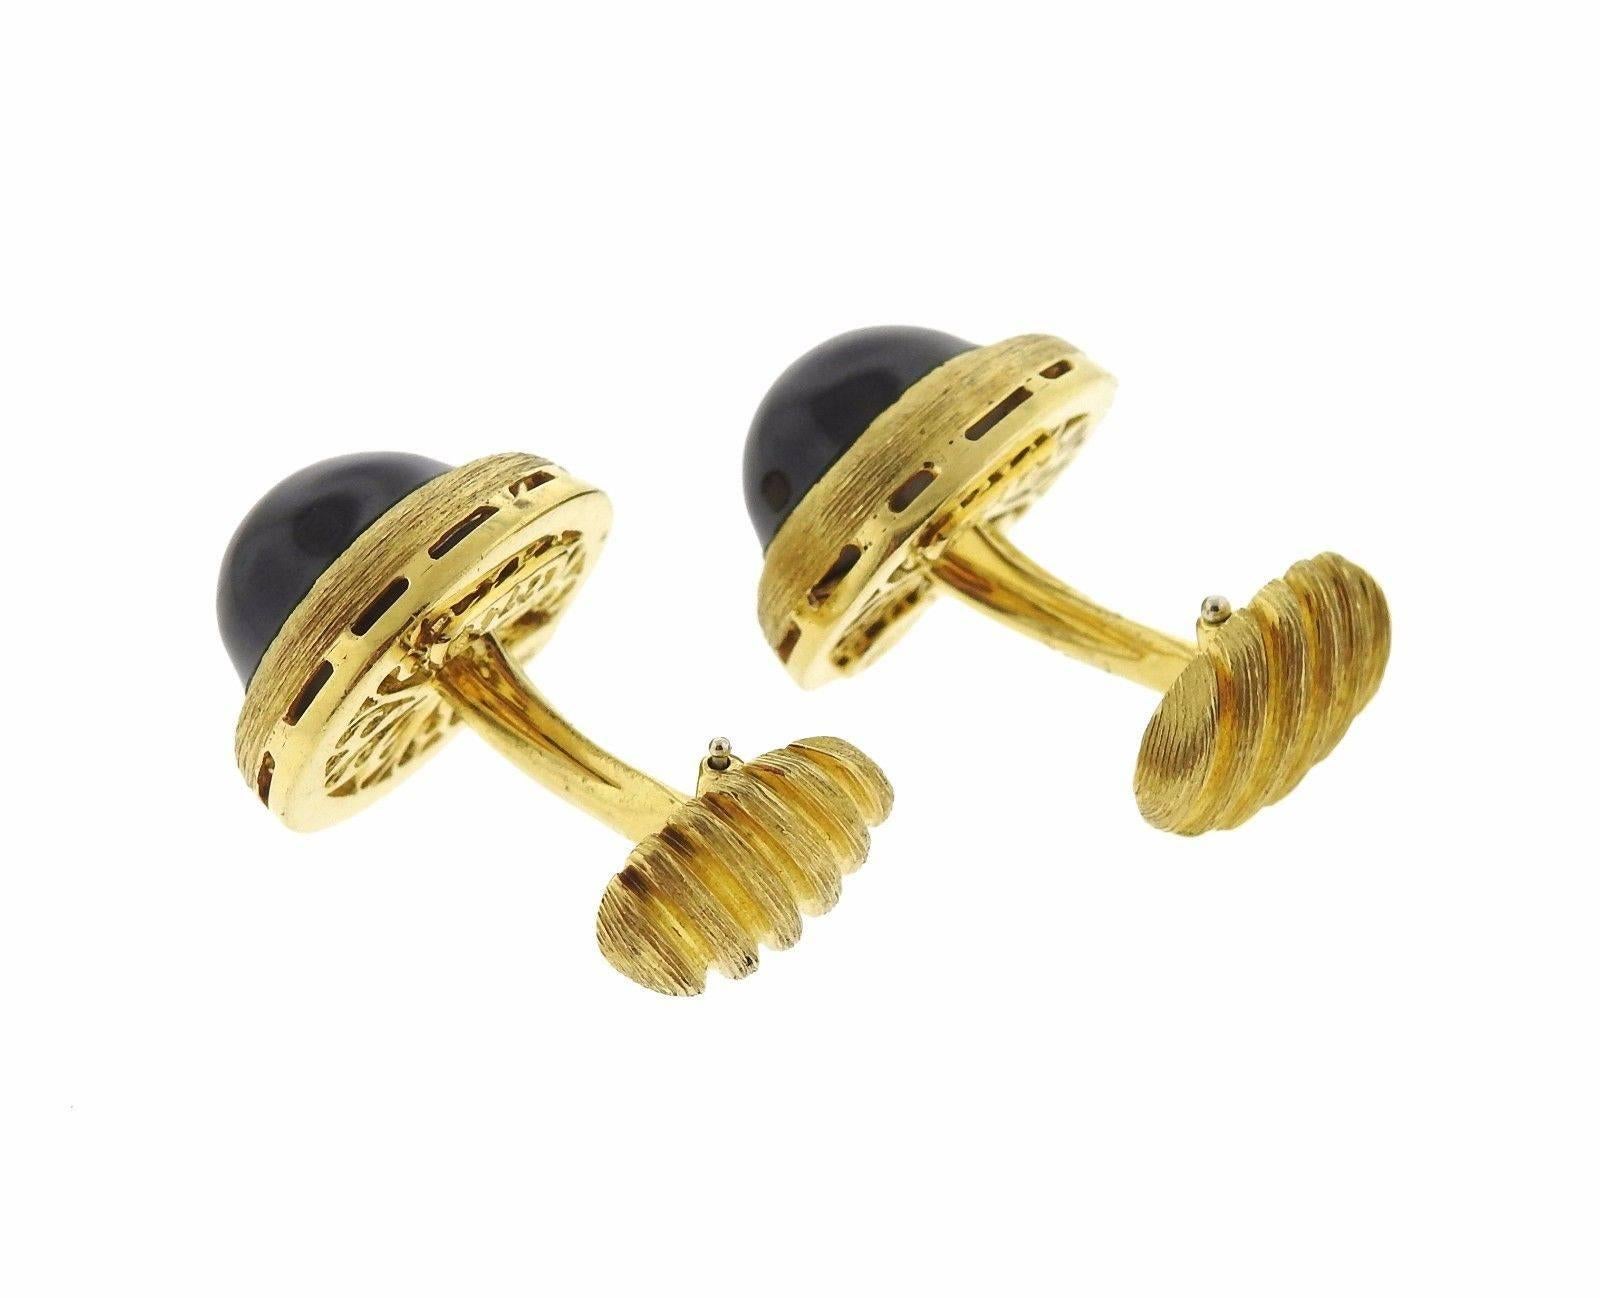 A pair of  18k gold cufflinks set with onyx.  The cufflinks measure 18mm x 15mm and weigh 23.3 grams.  Marked: 18k dunay 750.